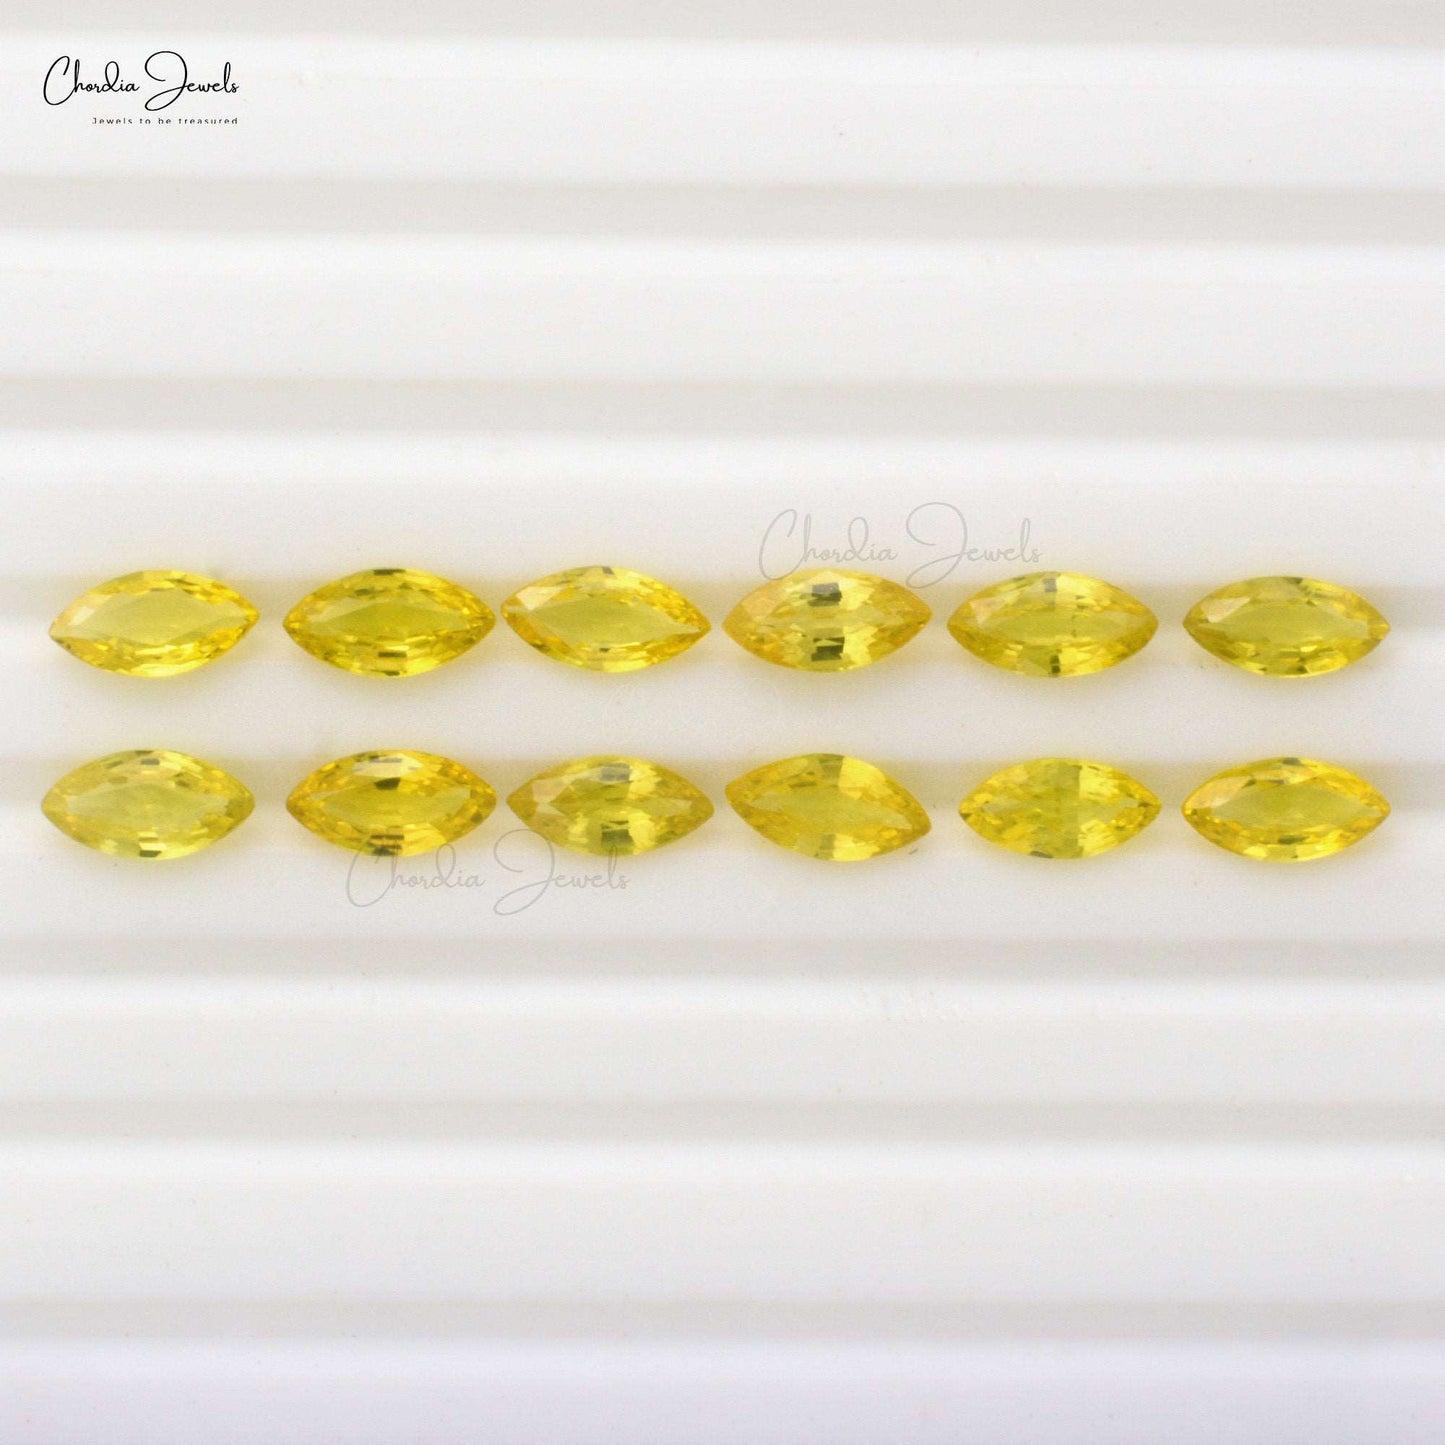 100% Natural Yellow Sapphire Stone Marquise-Cut 5x2.50mm, September Birthstone, 0.13 Carats Stone Weight, Stone Cutting: Excellent from Chordia Jewels